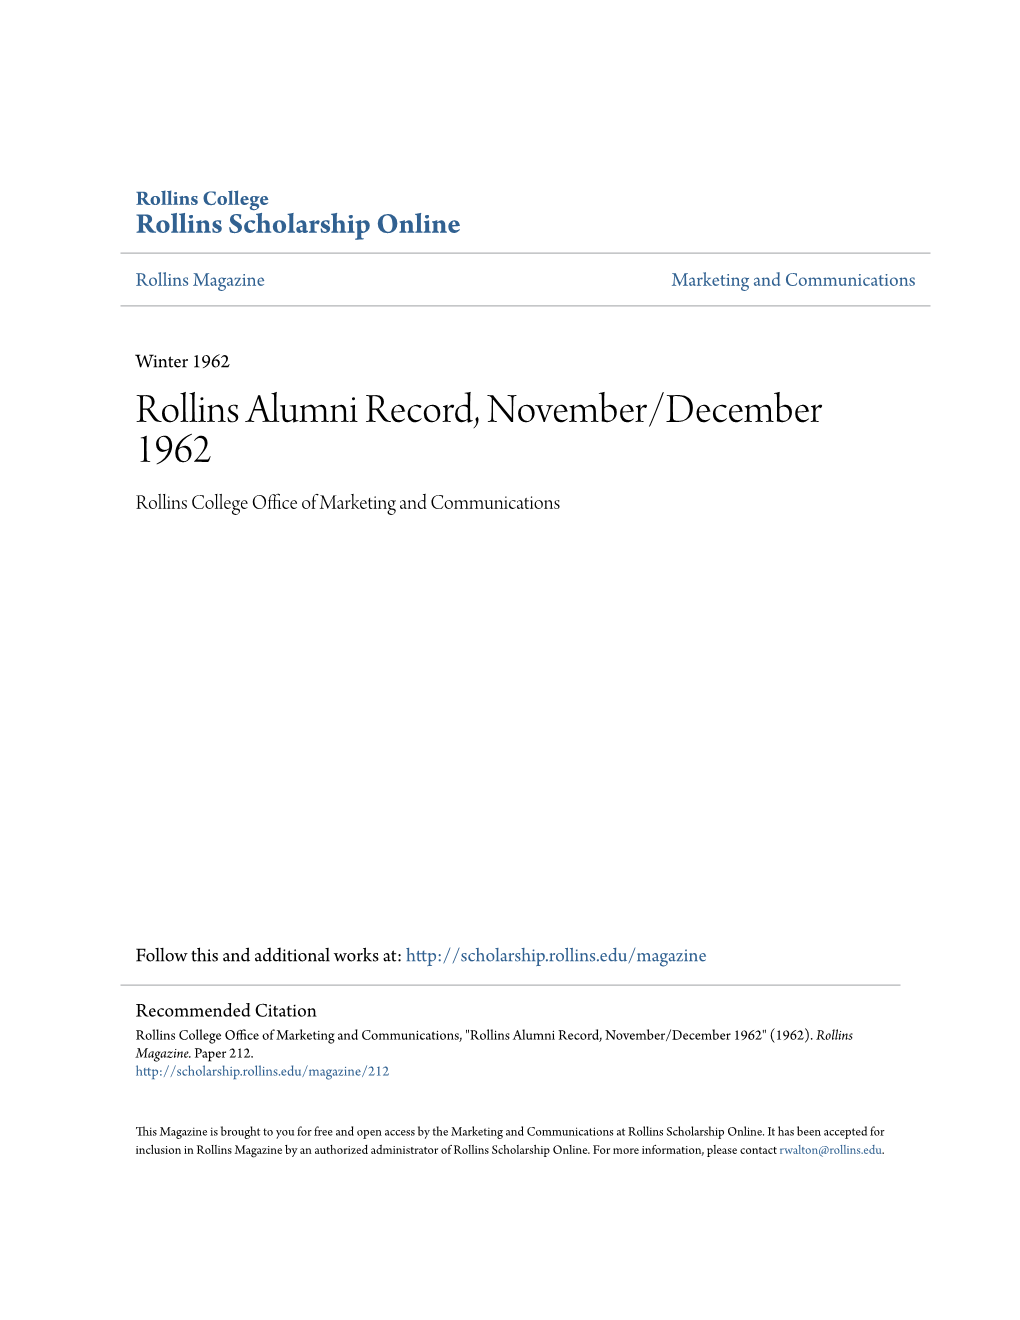 Rollins Alumni Record, November/December 1962 Rollins College Office Ofa M Rketing and Communications